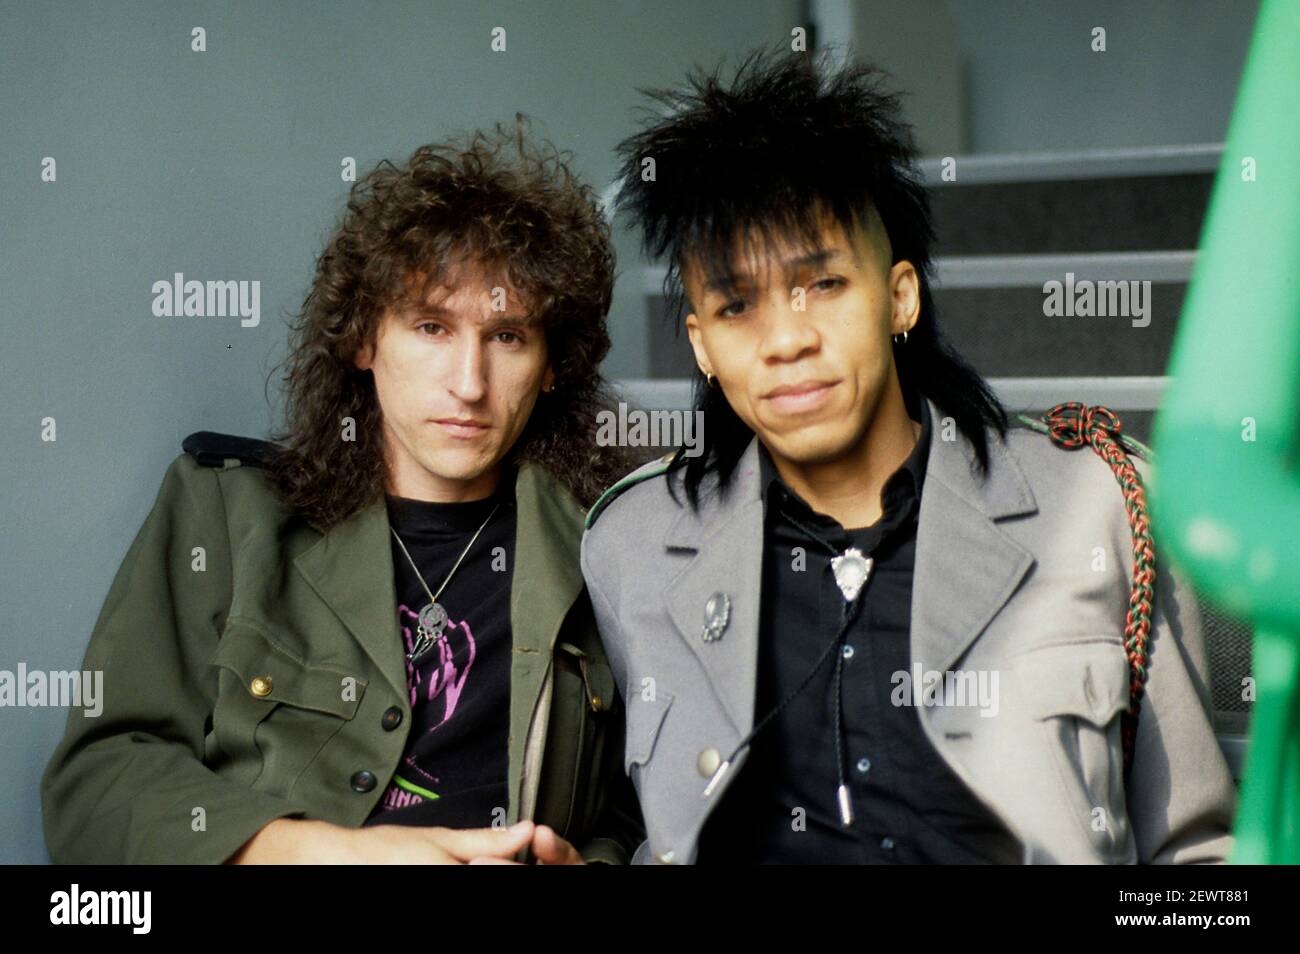 Jerry Gaskill and Doug Pinnick of King's X at a photoshoot on Atlantic Records. London, December 19, 1990 | usage worldwide Stock Photo